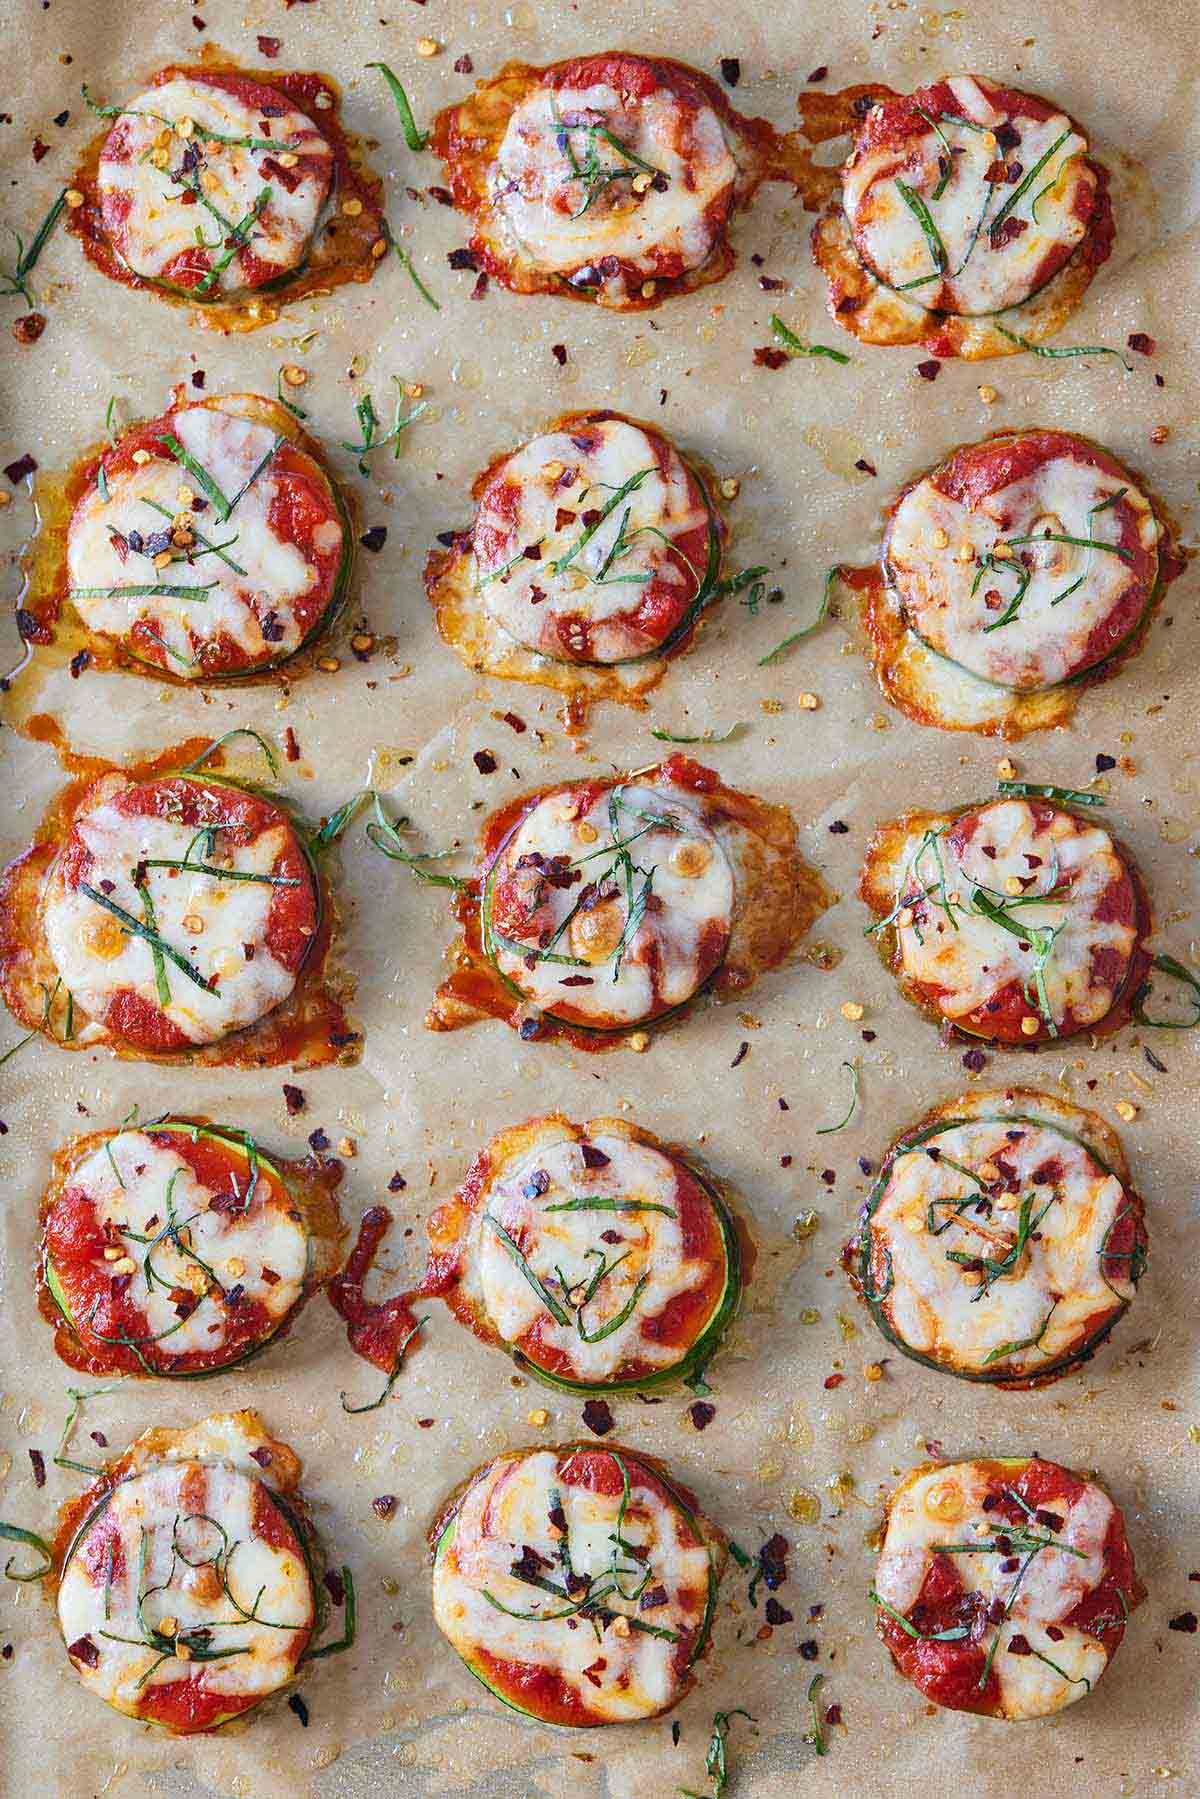 Overhead view of 15 zucchini pizza bites on a parchment lined sheet pan.